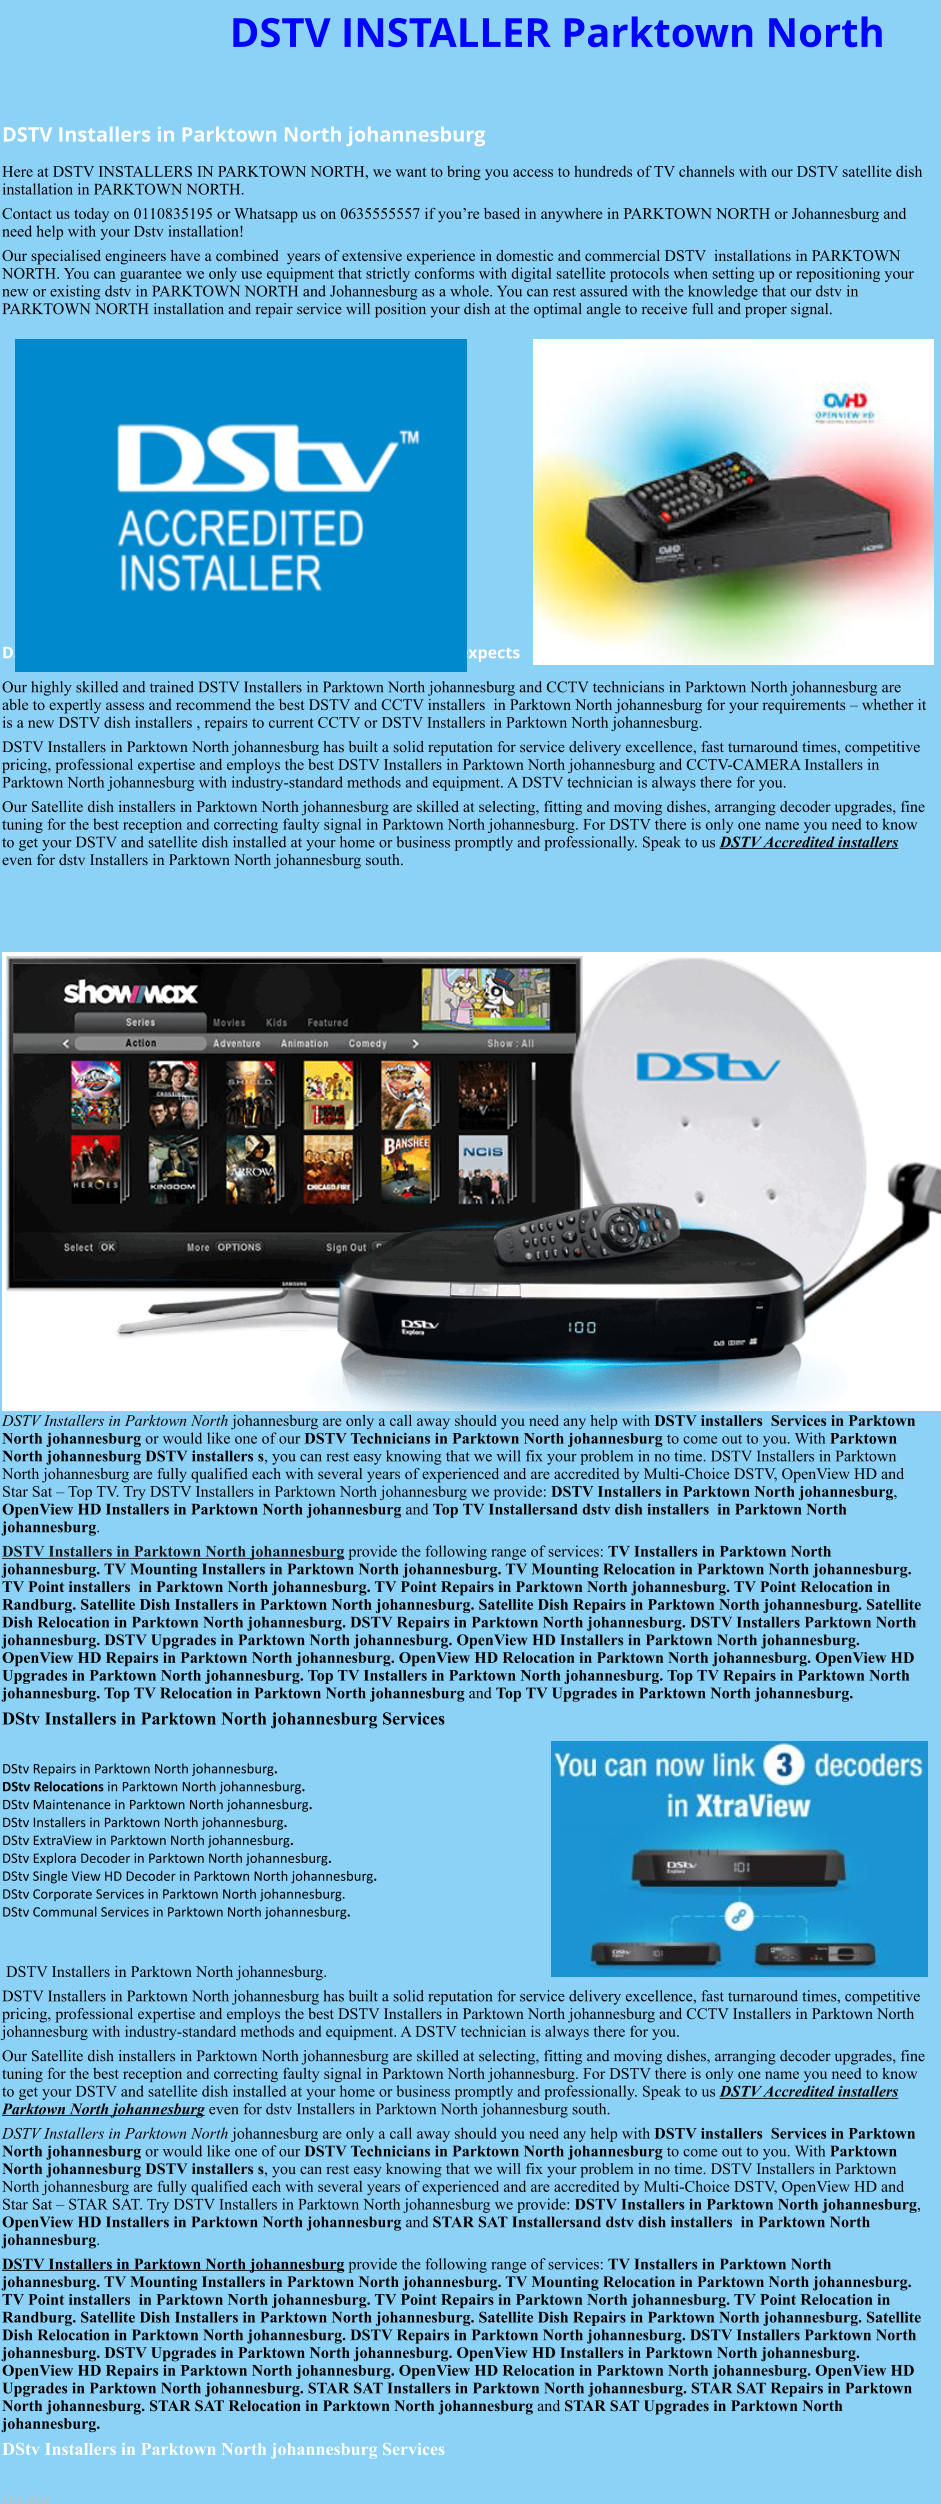 DSTV INSTALLER Parktown North  DSTV Installers in Parktown North johannesburg  Here at DSTV INSTALLERS IN PARKTOWN NORTH, we want to bring you access to hundreds of TV channels with our DSTV satellite dish installation in PARKTOWN NORTH. Contact us today on 0110835195 or Whatsapp us on 0635555557 if you’re based in anywhere in PARKTOWN NORTH or Johannesburg and need help with your Dstv installation! Our specialised engineers have a combined  years of extensive experience in domestic and commercial DSTV  installations in PARKTOWN NORTH. You can guarantee we only use equipment that strictly conforms with digital satellite protocols when setting up or repositioning your new or existing dstv in PARKTOWN NORTH and Johannesburg as a whole. You can rest assured with the knowledge that our dstv in PARKTOWN NORTH installation and repair service will position your dish at the optimal angle to receive full and proper signal.              DSTV Installers in Parktown North johannesburg team of expects Our highly skilled and trained DSTV Installers in Parktown North johannesburg and CCTV technicians in Parktown North johannesburg are able to expertly assess and recommend the best DSTV and CCTV installers  in Parktown North johannesburg for your requirements – whether it is a new DSTV dish installers , repairs to current CCTV or DSTV Installers in Parktown North johannesburg. DSTV Installers in Parktown North johannesburg has built a solid reputation for service delivery excellence, fast turnaround times, competitive pricing, professional expertise and employs the best DSTV Installers in Parktown North johannesburg and CCTV-CAMERA Installers in Parktown North johannesburg with industry-standard methods and equipment. A DSTV technician is always there for you. Our Satellite dish installers in Parktown North johannesburg are skilled at selecting, fitting and moving dishes, arranging decoder upgrades, fine tuning for the best reception and correcting faulty signal in Parktown North johannesburg. For DSTV there is only one name you need to know to get your DSTV and satellite dish installed at your home or business promptly and professionally. Speak to us DSTV Accredited installers even for dstv Installers in Parktown North johannesburg south.                       DSTV Installers in Parktown North johannesburg are only a call away should you need any help with DSTV installers  Services in Parktown North johannesburg or would like one of our DSTV Technicians in Parktown North johannesburg to come out to you. With Parktown North johannesburg DSTV installers s, you can rest easy knowing that we will fix your problem in no time. DSTV Installers in Parktown North johannesburg are fully qualified each with several years of experienced and are accredited by Multi-Choice DSTV, OpenView HD and Star Sat – Top TV. Try DSTV Installers in Parktown North johannesburg we provide: DSTV Installers in Parktown North johannesburg, OpenView HD Installers in Parktown North johannesburg and Top TV Installersand dstv dish installers  in Parktown North johannesburg. DSTV Installers in Parktown North johannesburg provide the following range of services: TV Installers in Parktown North johannesburg. TV Mounting Installers in Parktown North johannesburg. TV Mounting Relocation in Parktown North johannesburg. TV Point installers  in Parktown North johannesburg. TV Point Repairs in Parktown North johannesburg. TV Point Relocation in Randburg. Satellite Dish Installers in Parktown North johannesburg. Satellite Dish Repairs in Parktown North johannesburg. Satellite Dish Relocation in Parktown North johannesburg. DSTV Repairs in Parktown North johannesburg. DSTV Installers Parktown North johannesburg. DSTV Upgrades in Parktown North johannesburg. OpenView HD Installers in Parktown North johannesburg. OpenView HD Repairs in Parktown North johannesburg. OpenView HD Relocation in Parktown North johannesburg. OpenView HD Upgrades in Parktown North johannesburg. Top TV Installers in Parktown North johannesburg. Top TV Repairs in Parktown North johannesburg. Top TV Relocation in Parktown North johannesburg and Top TV Upgrades in Parktown North johannesburg. DStv Installers in Parktown North johannesburg Services  DStv Repairs in Parktown North johannesburg.  DStv Relocations in Parktown North johannesburg.  DStv Maintenance in Parktown North johannesburg. DStv Installers in Parktown North johannesburg. DStv ExtraView in Parktown North johannesburg. DStv Explora Decoder in Parktown North johannesburg. DStv Single View HD Decoder in Parktown North johannesburg. DStv Corporate Services in Parktown North johannesburg. DStv Communal Services in Parktown North johannesburg.    DSTV Installers in Parktown North johannesburg. DSTV Installers in Parktown North johannesburg has built a solid reputation for service delivery excellence, fast turnaround times, competitive pricing, professional expertise and employs the best DSTV Installers in Parktown North johannesburg and CCTV Installers in Parktown North johannesburg with industry-standard methods and equipment. A DSTV technician is always there for you. Our Satellite dish installers in Parktown North johannesburg are skilled at selecting, fitting and moving dishes, arranging decoder upgrades, fine tuning for the best reception and correcting faulty signal in Parktown North johannesburg. For DSTV there is only one name you need to know to get your DSTV and satellite dish installed at your home or business promptly and professionally. Speak to us DSTV Accredited installers Parktown North johannesburg even for dstv Installers in Parktown North johannesburg south. DSTV Installers in Parktown North johannesburg are only a call away should you need any help with DSTV installers  Services in Parktown North johannesburg or would like one of our DSTV Technicians in Parktown North johannesburg to come out to you. With Parktown North johannesburg DSTV installers s, you can rest easy knowing that we will fix your problem in no time. DSTV Installers in Parktown North johannesburg are fully qualified each with several years of experienced and are accredited by Multi-Choice DSTV, OpenView HD and Star Sat – STAR SAT. Try DSTV Installers in Parktown North johannesburg we provide: DSTV Installers in Parktown North johannesburg, OpenView HD Installers in Parktown North johannesburg and STAR SAT Installersand dstv dish installers  in Parktown North johannesburg. DSTV Installers in Parktown North johannesburg provide the following range of services: TV Installers in Parktown North johannesburg. TV Mounting Installers in Parktown North johannesburg. TV Mounting Relocation in Parktown North johannesburg. TV Point installers  in Parktown North johannesburg. TV Point Repairs in Parktown North johannesburg. TV Point Relocation in Randburg. Satellite Dish Installers in Parktown North johannesburg. Satellite Dish Repairs in Parktown North johannesburg. Satellite Dish Relocation in Parktown North johannesburg. DSTV Repairs in Parktown North johannesburg. DSTV Installers Parktown North johannesburg. DSTV Upgrades in Parktown North johannesburg. OpenView HD Installers in Parktown North johannesburg. OpenView HD Repairs in Parktown North johannesburg. OpenView HD Relocation in Parktown North johannesburg. OpenView HD Upgrades in Parktown North johannesburg. STAR SAT Installers in Parktown North johannesburg. STAR SAT Repairs in Parktown North johannesburg. STAR SAT Relocation in Parktown North johannesburg and STAR SAT Upgrades in Parktown North johannesburg. DStv Installers in Parktown North johannesburg Services  See also